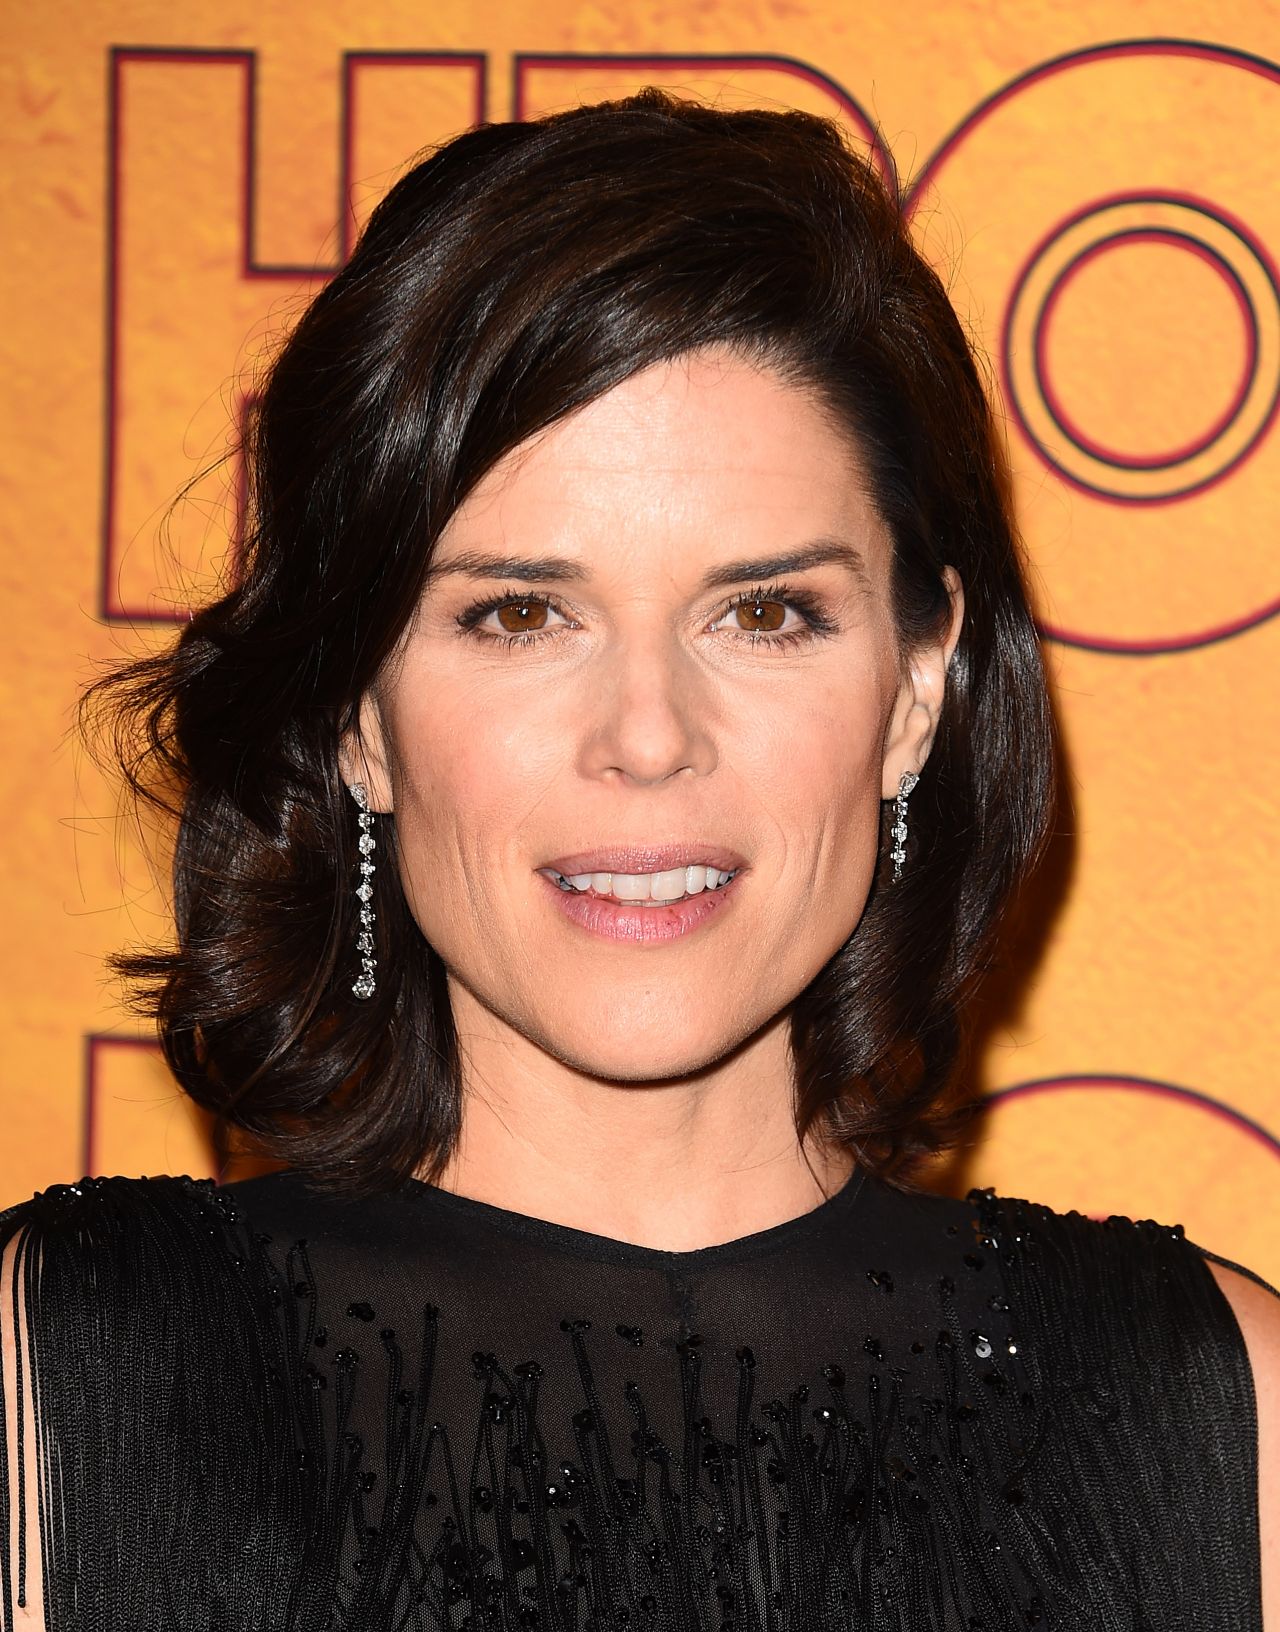 Neve campbell is a canadian actress. 